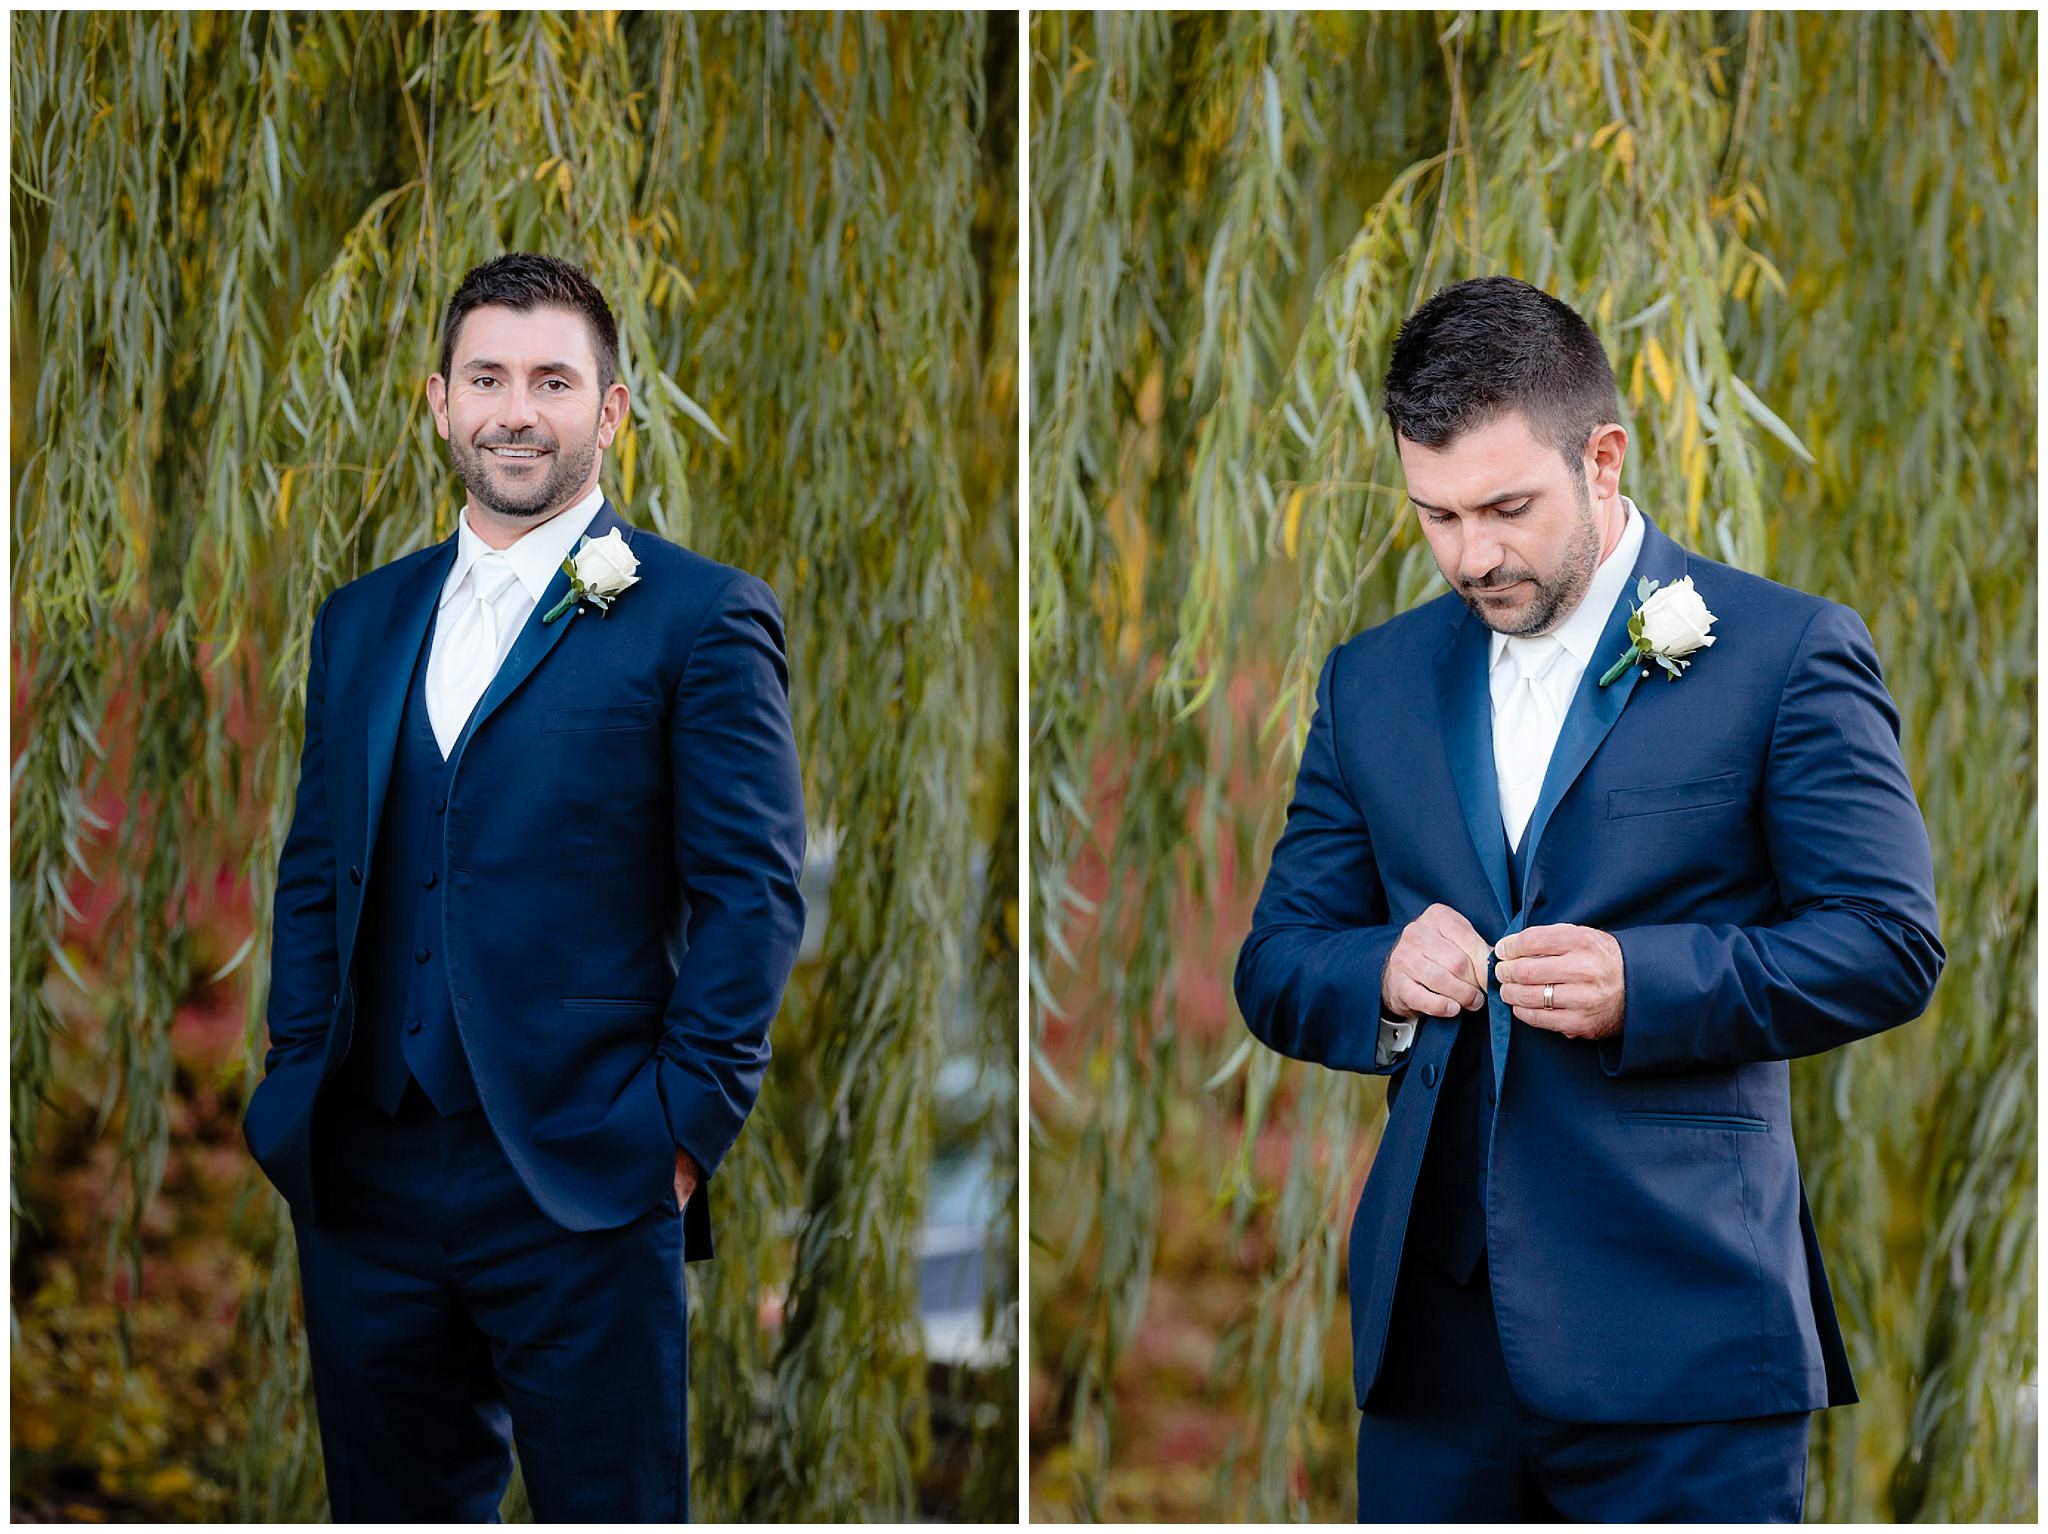 Groom in a navy tux from Jack's Tuxedo at his Riverside Landing wedding